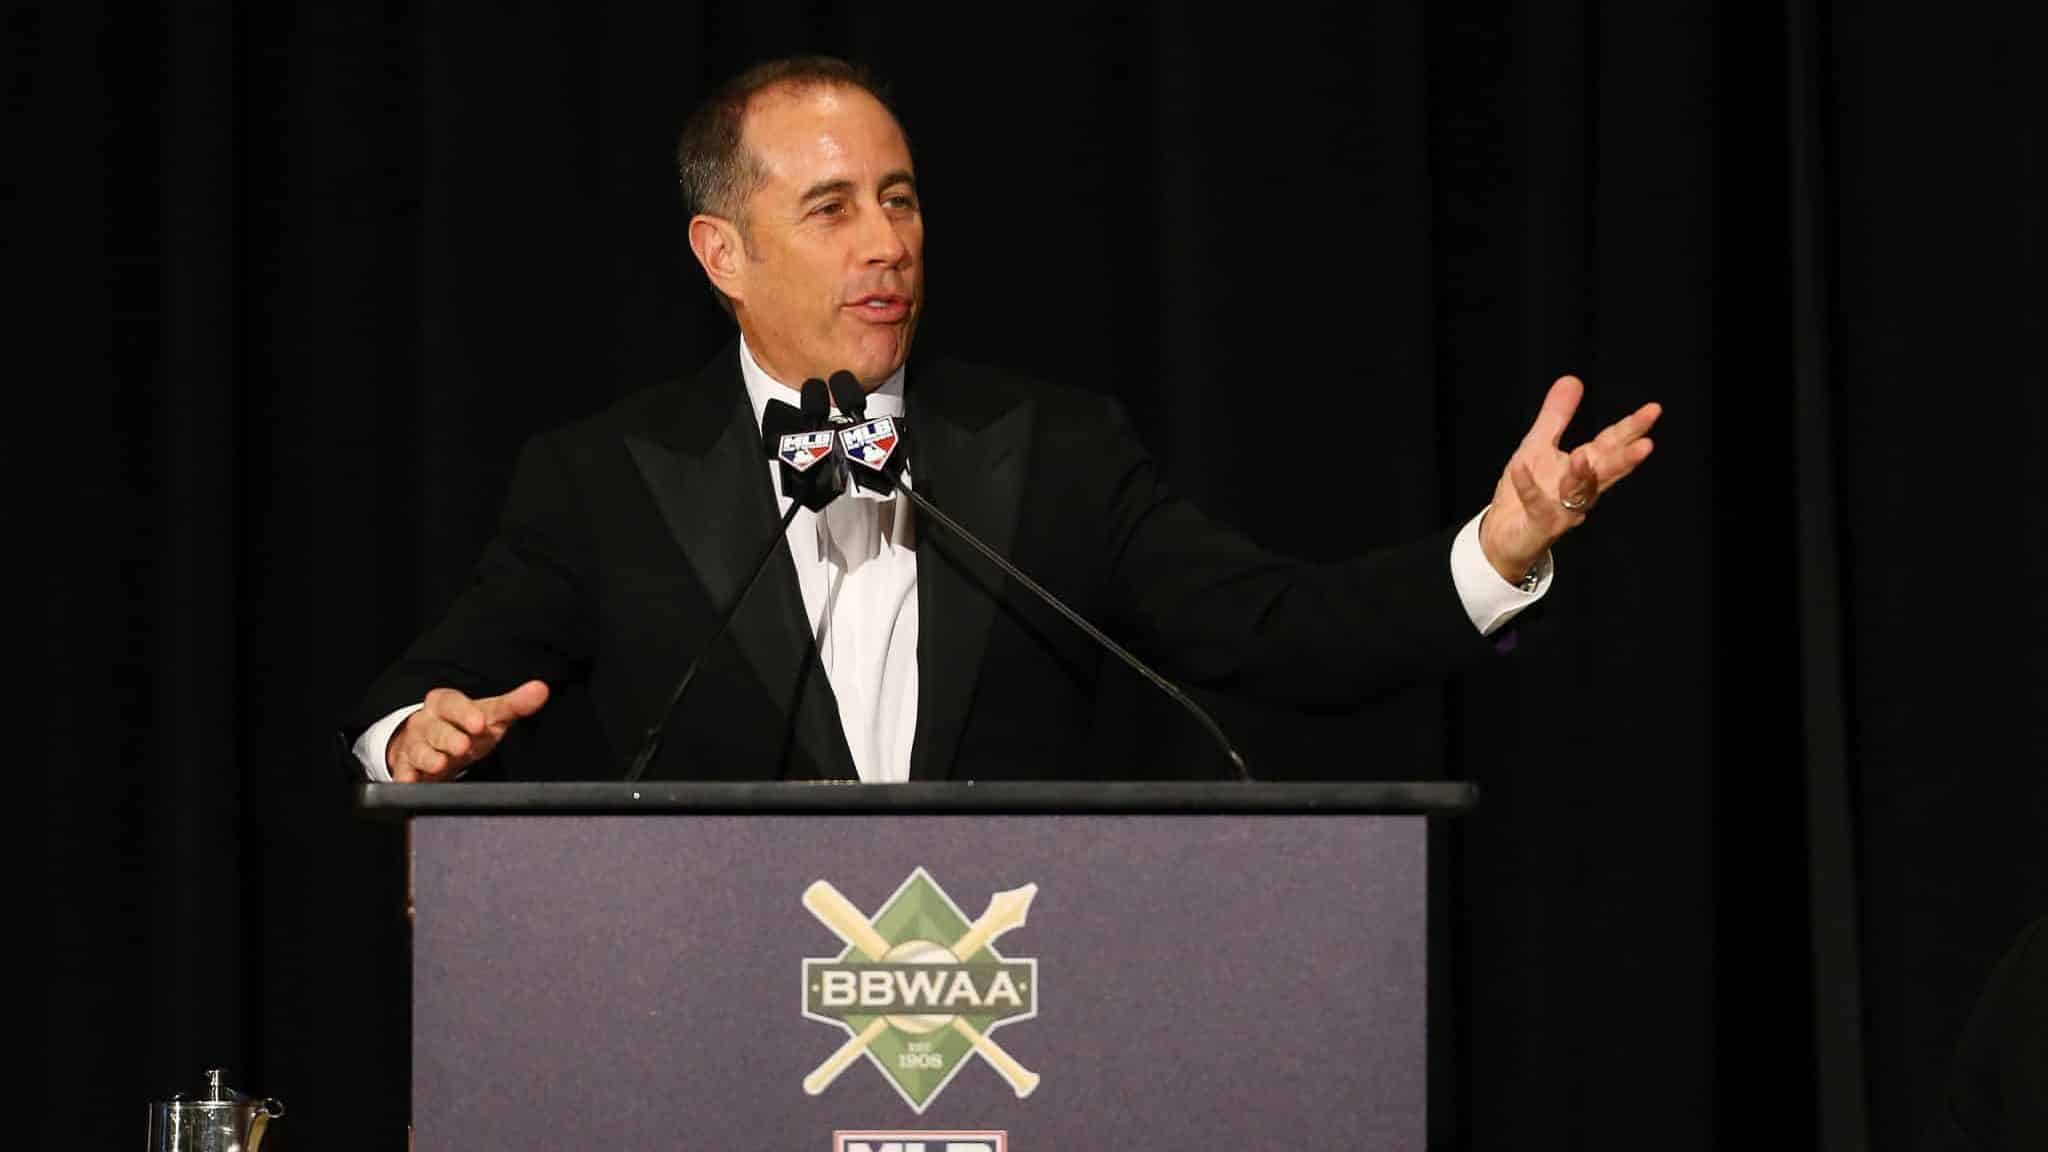 NEW YORK, NEW YORK - JANUARY 25: Jerry Seinfeld speaks prior to presenting Pete Alonso of the New York Mets with the 2019 National League Rookie Of The Year Award during the 97th annual New York Baseball Writers' Dinner on January 25, 2020 Sheraton New York in New York City.